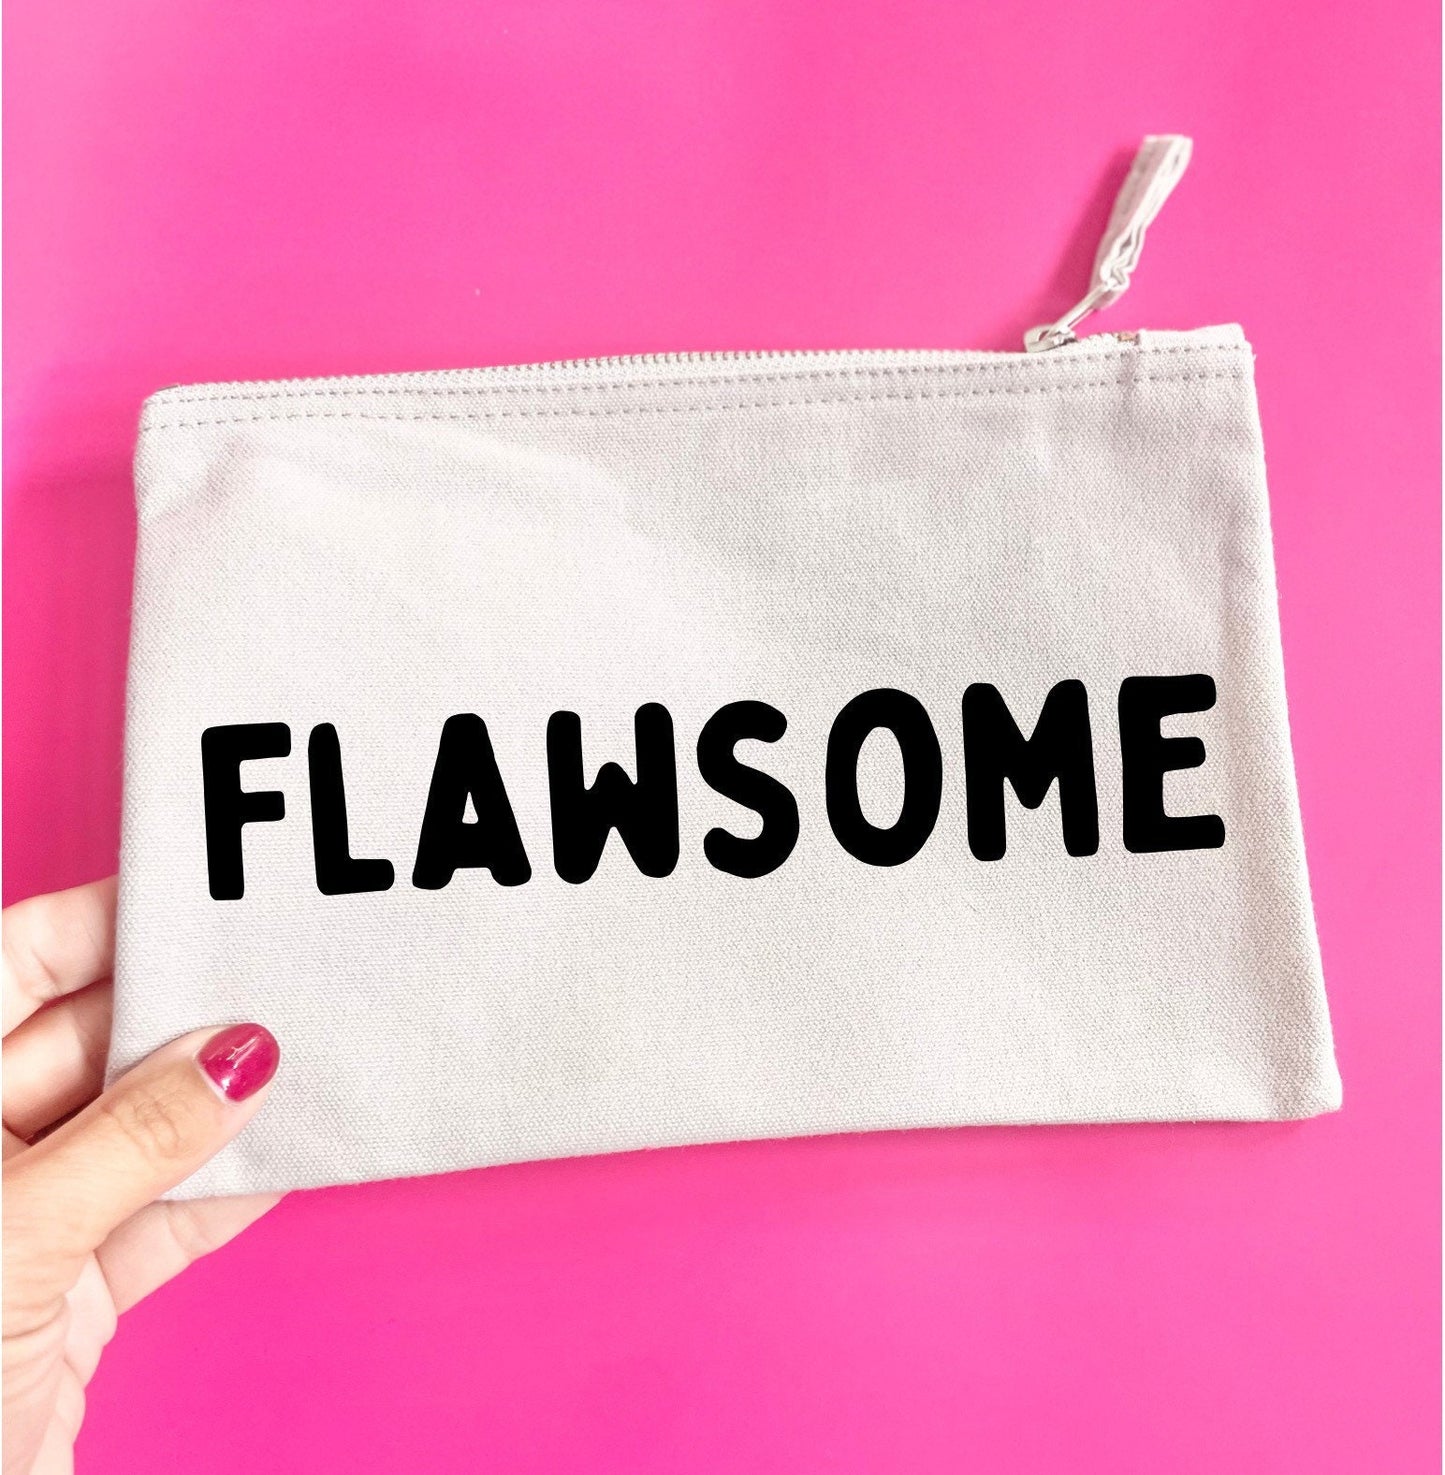 Flawsome pouch, gift idea for teenage daughter , granddaughter. Fun make up bags, brush case, lipstick pouch